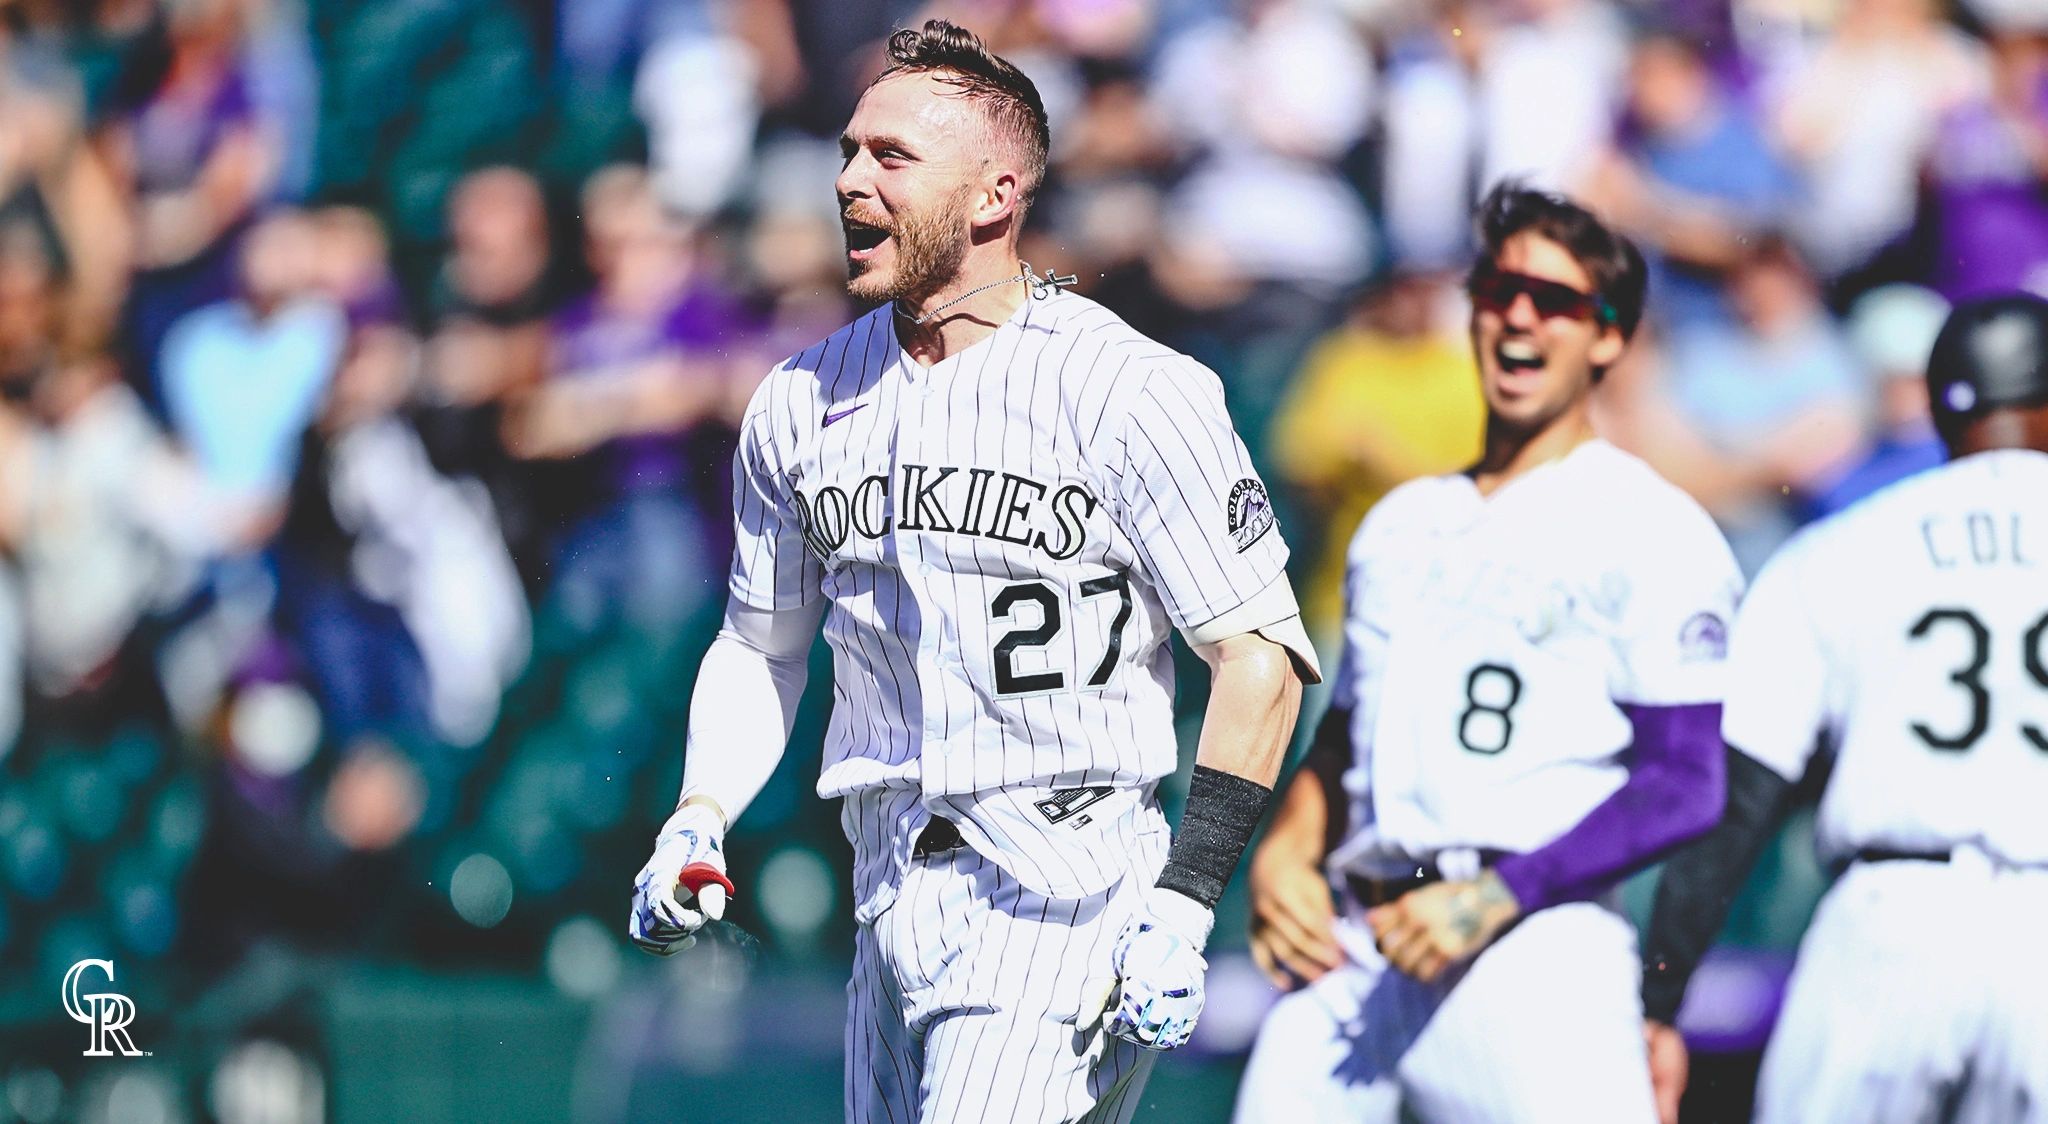 Change is Going to Come: Trevor Story's Actions Speak Volumes